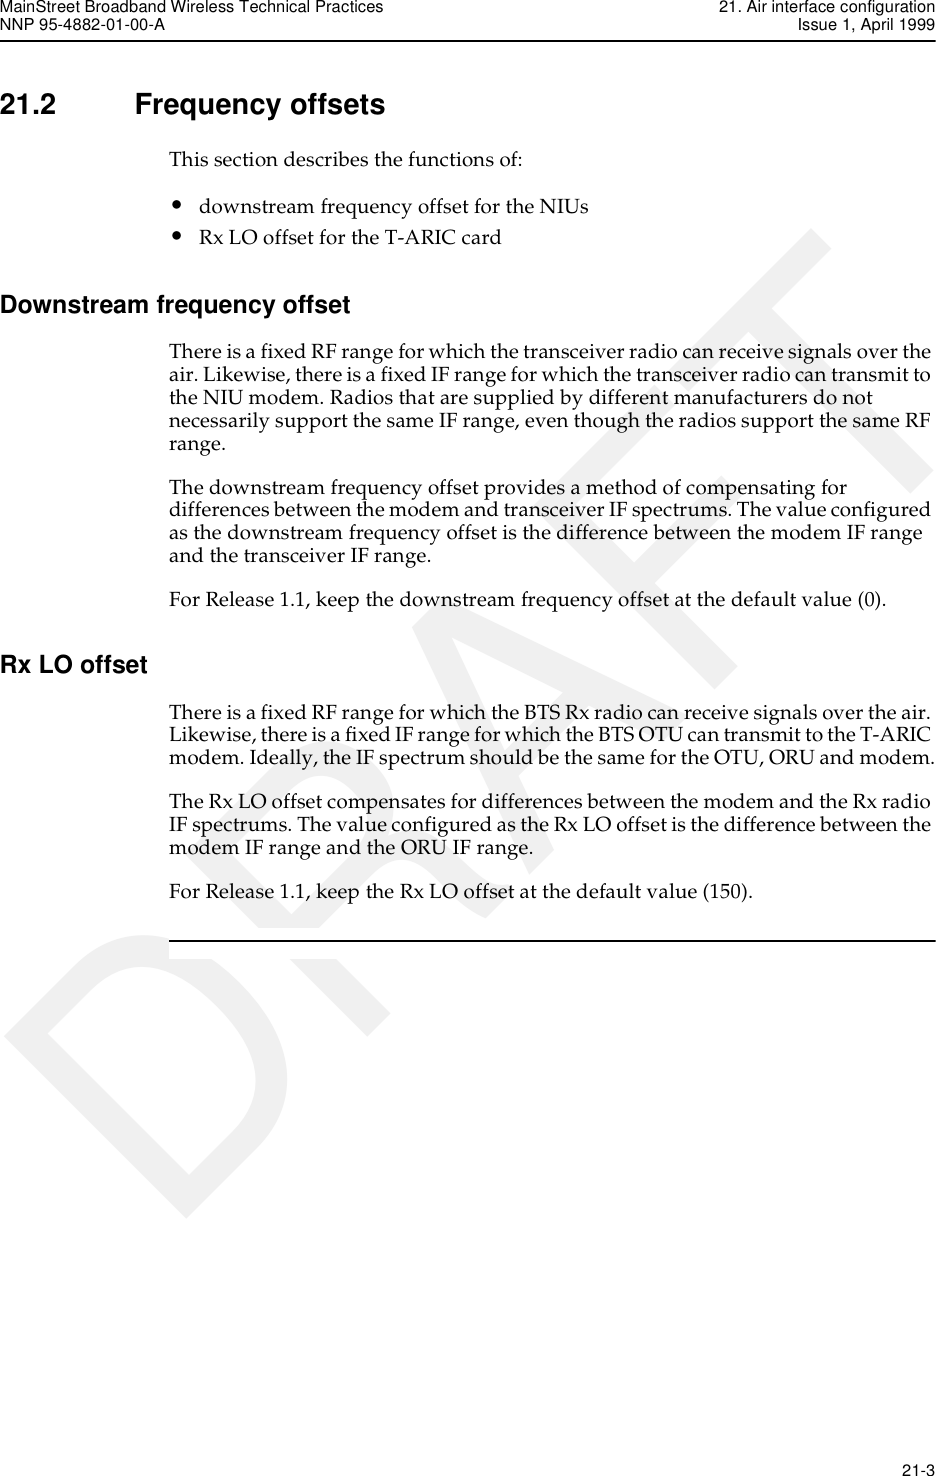 MainStreet Broadband Wireless Technical Practices 21. Air interface configurationNNP 95-4882-01-00-A Issue 1, April 1999   21-3DRAFT21.2 Frequency offsetsThis section describes the functions of:•downstream frequency offset for the NIUs•Rx LO offset for the T-ARIC cardDownstream frequency offsetThere is a fixed RF range for which the transceiver radio can receive signals over the air. Likewise, there is a fixed IF range for which the transceiver radio can transmit to the NIU modem. Radios that are supplied by different manufacturers do not necessarily support the same IF range, even though the radios support the same RF range.The downstream frequency offset provides a method of compensating for differences between the modem and transceiver IF spectrums. The value configured as the downstream frequency offset is the difference between the modem IF range and the transceiver IF range.For Release 1.1, keep the downstream frequency offset at the default value (0).Rx LO offsetThere is a fixed RF range for which the BTS Rx radio can receive signals over the air. Likewise, there is a fixed IF range for which the BTS OTU can transmit to the T-ARIC modem. Ideally, the IF spectrum should be the same for the OTU, ORU and modem.The Rx LO offset compensates for differences between the modem and the Rx radio IF spectrums. The value configured as the Rx LO offset is the difference between the modem IF range and the ORU IF range.For Release 1.1, keep the Rx LO offset at the default value (150).